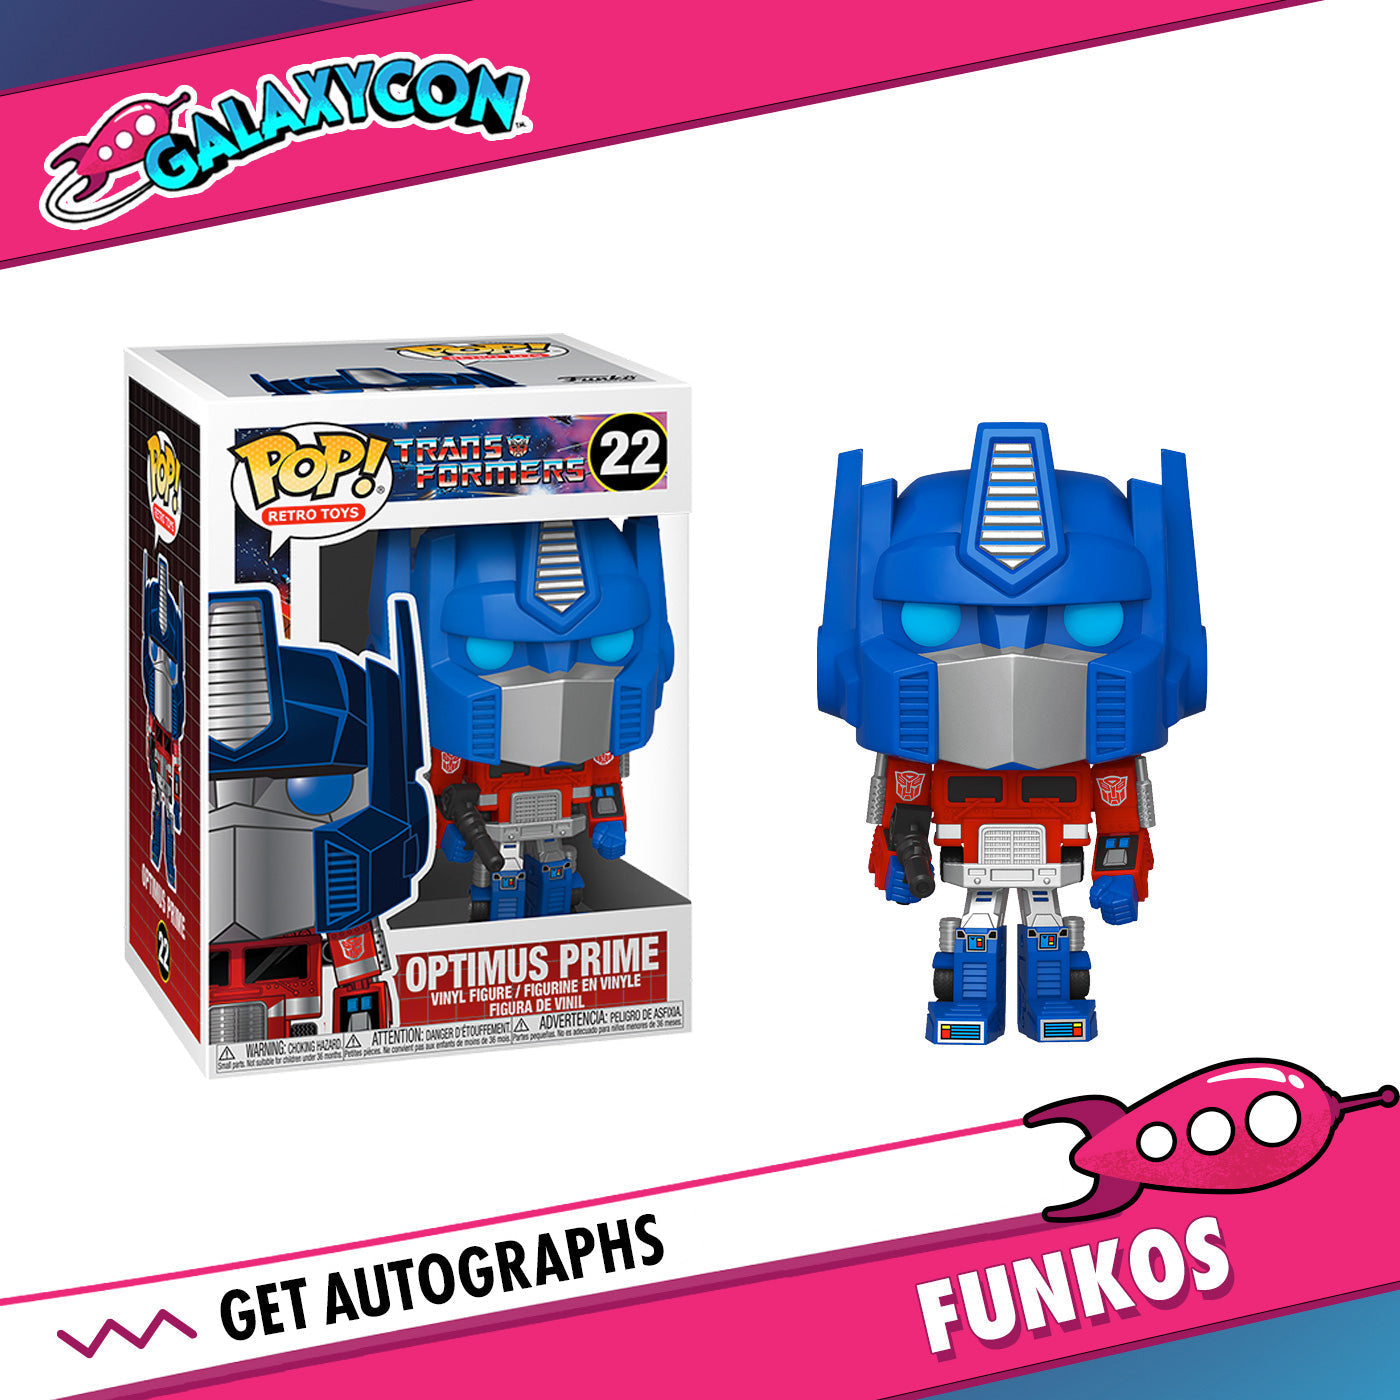 Peter Cullen: Autograph Signing on a Funko Pop, February 18th